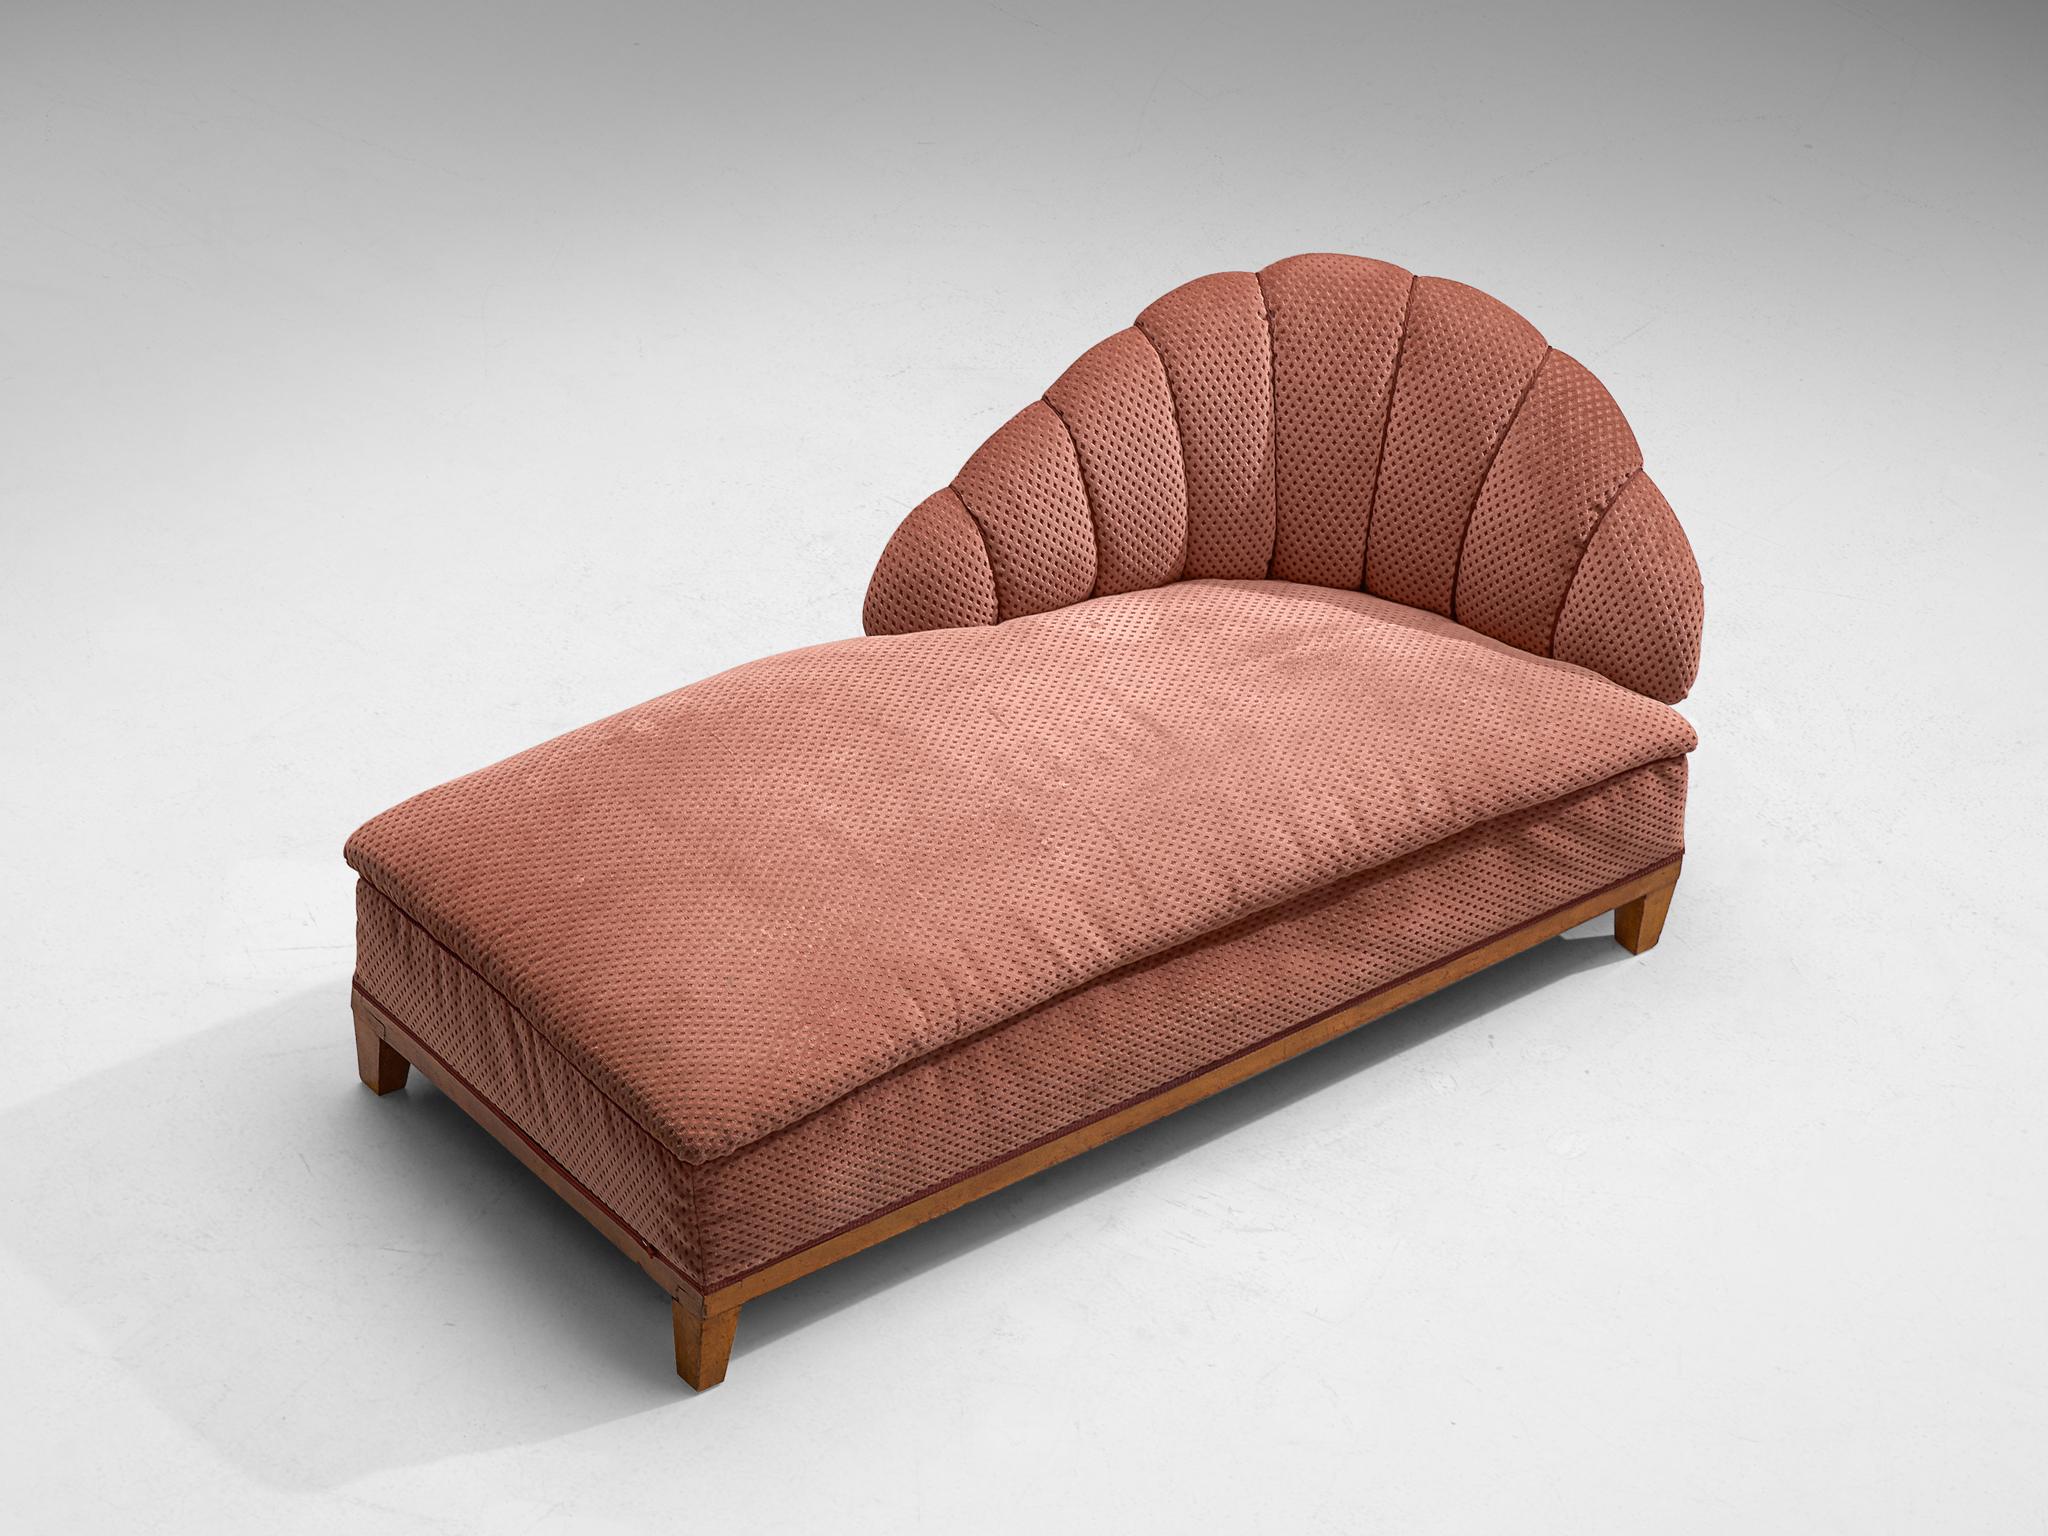 Daybed, oak and fabric, France, 1930s.

This freestanding daybed features an oak frame in combination with a soft pink upholstery. The daybed has a Classic, curved high board, finished with pipelines. The legs are tapered and form a balanced whole